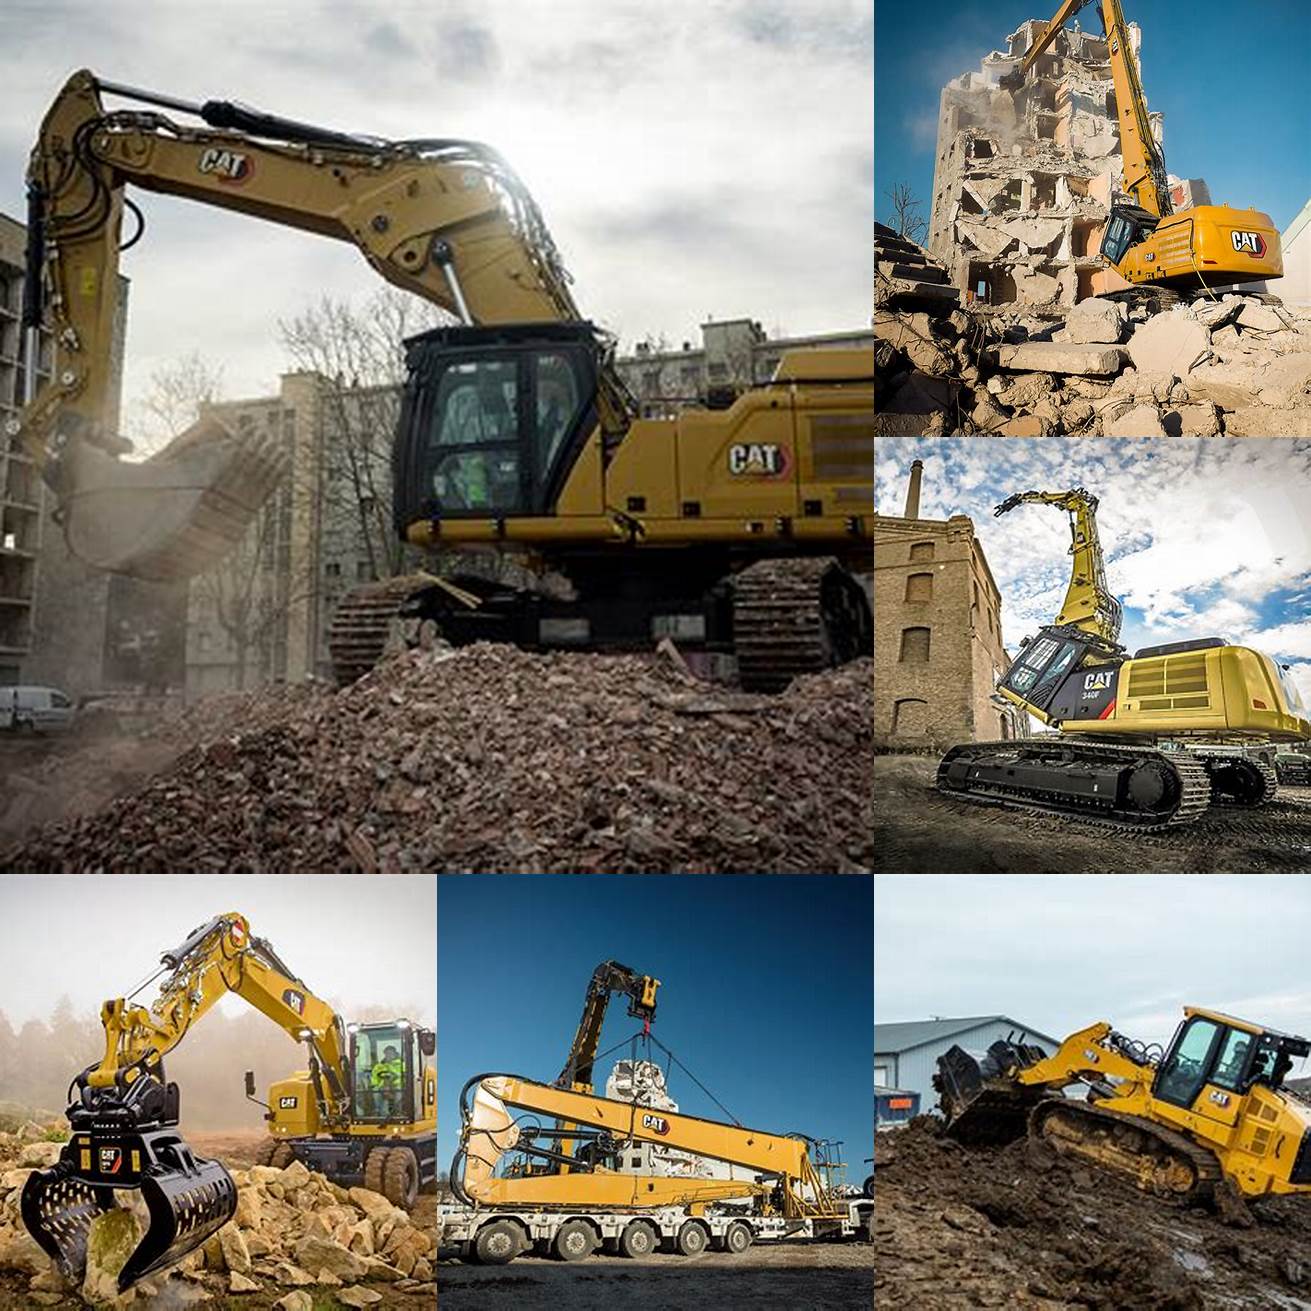 Demolition - The Cat 963 is a popular choice for demolition projects thanks to its ability to move heavy loads quickly and efficiently